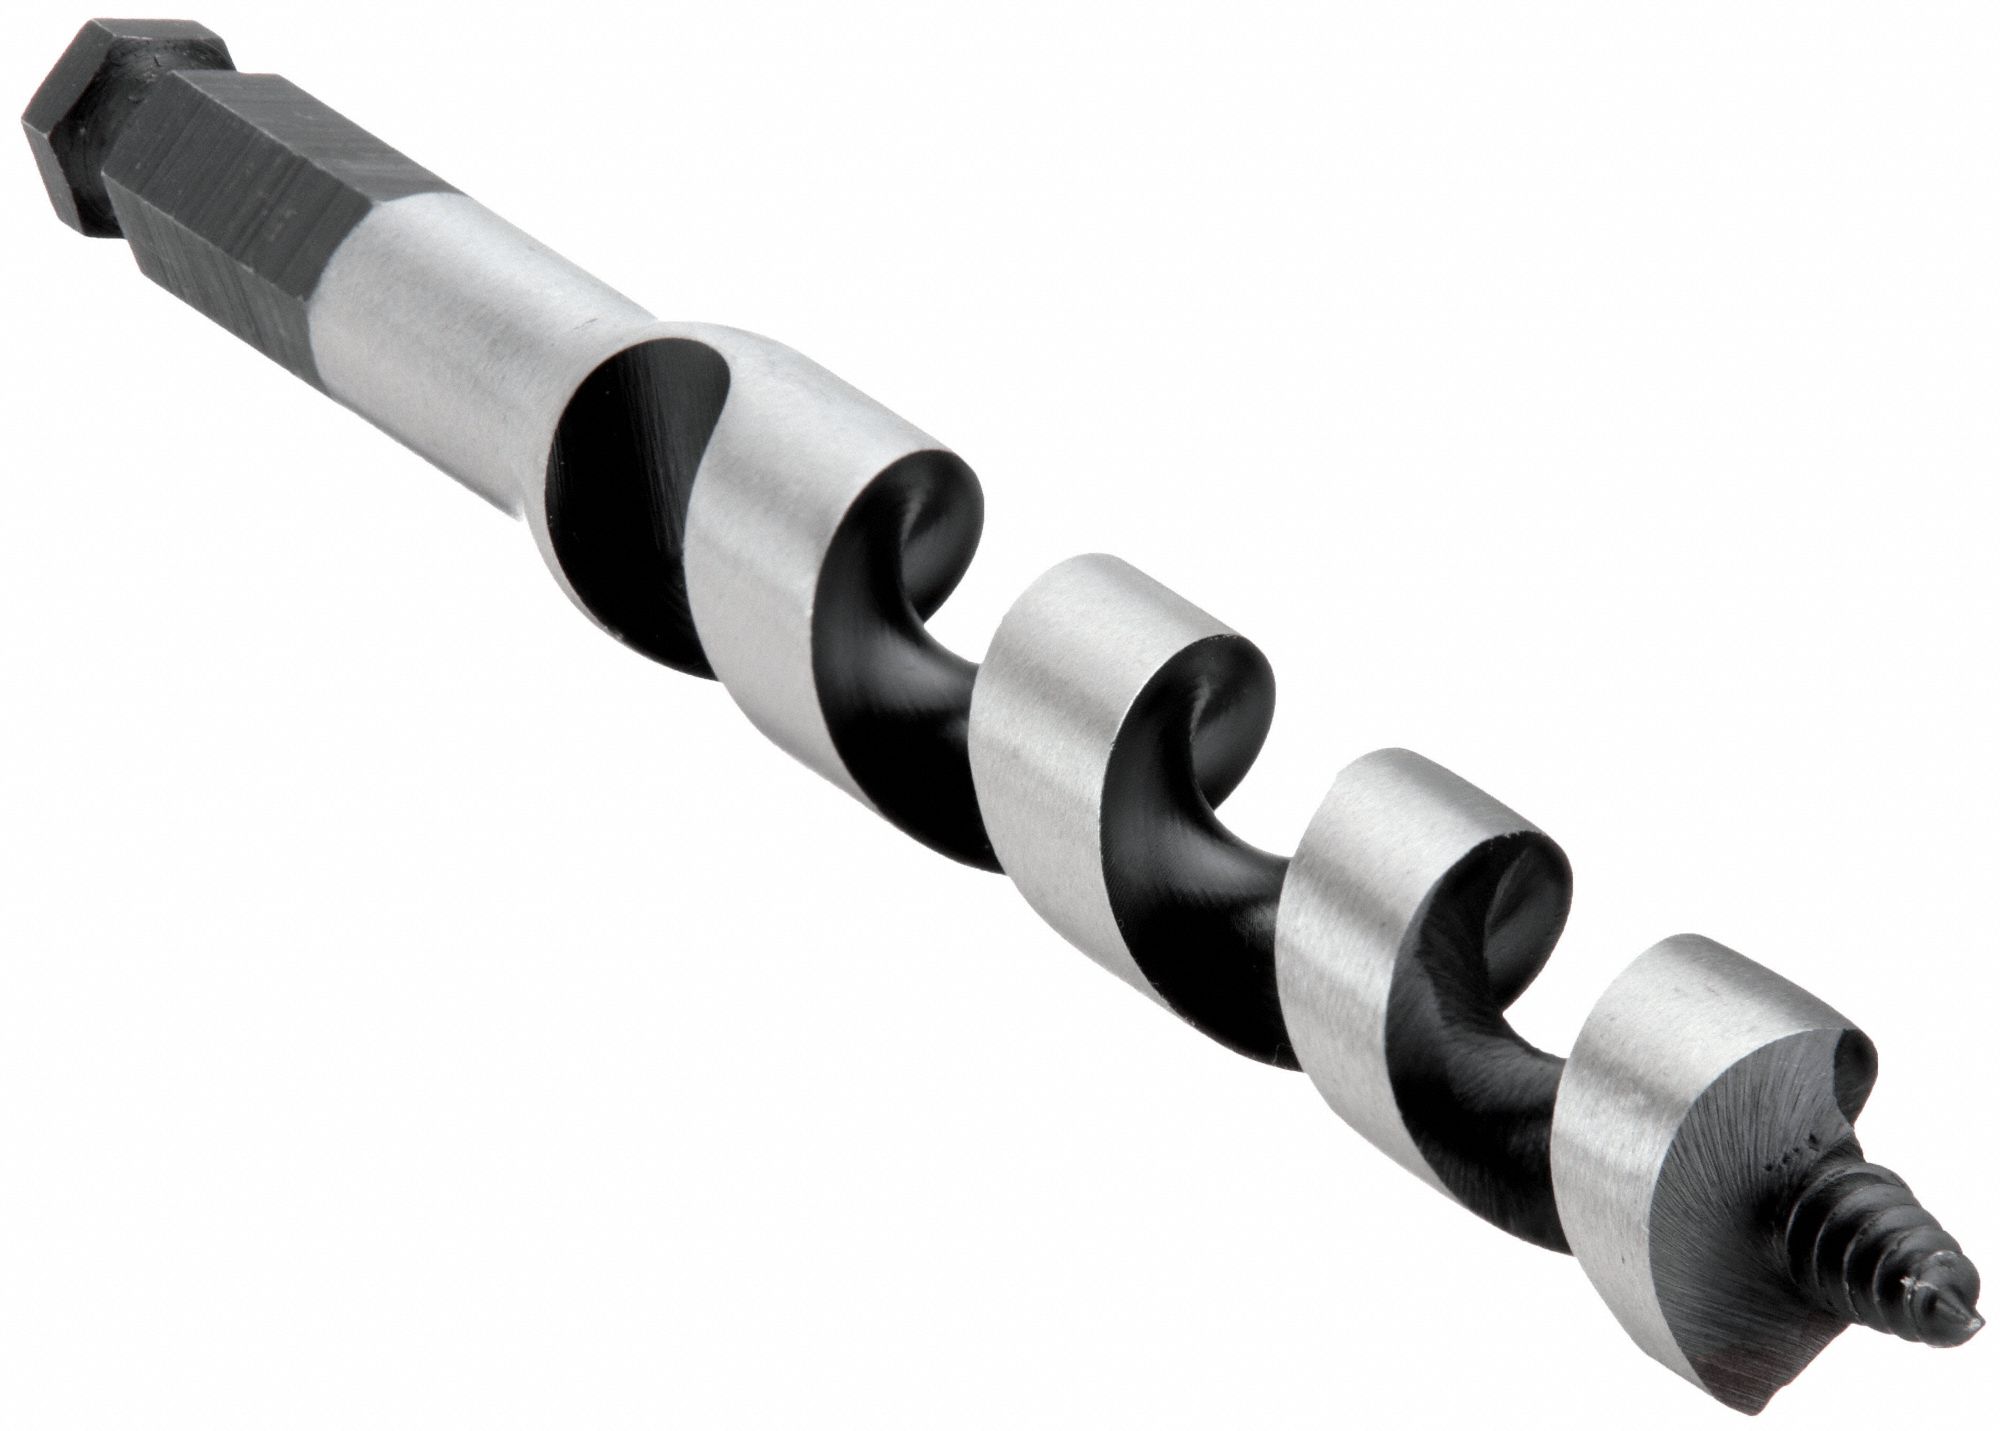 IRWIN AUGER DRILL BIT, ⅞ IN DRILL BIT SIZE, 7½ IN LENGTH, HEX